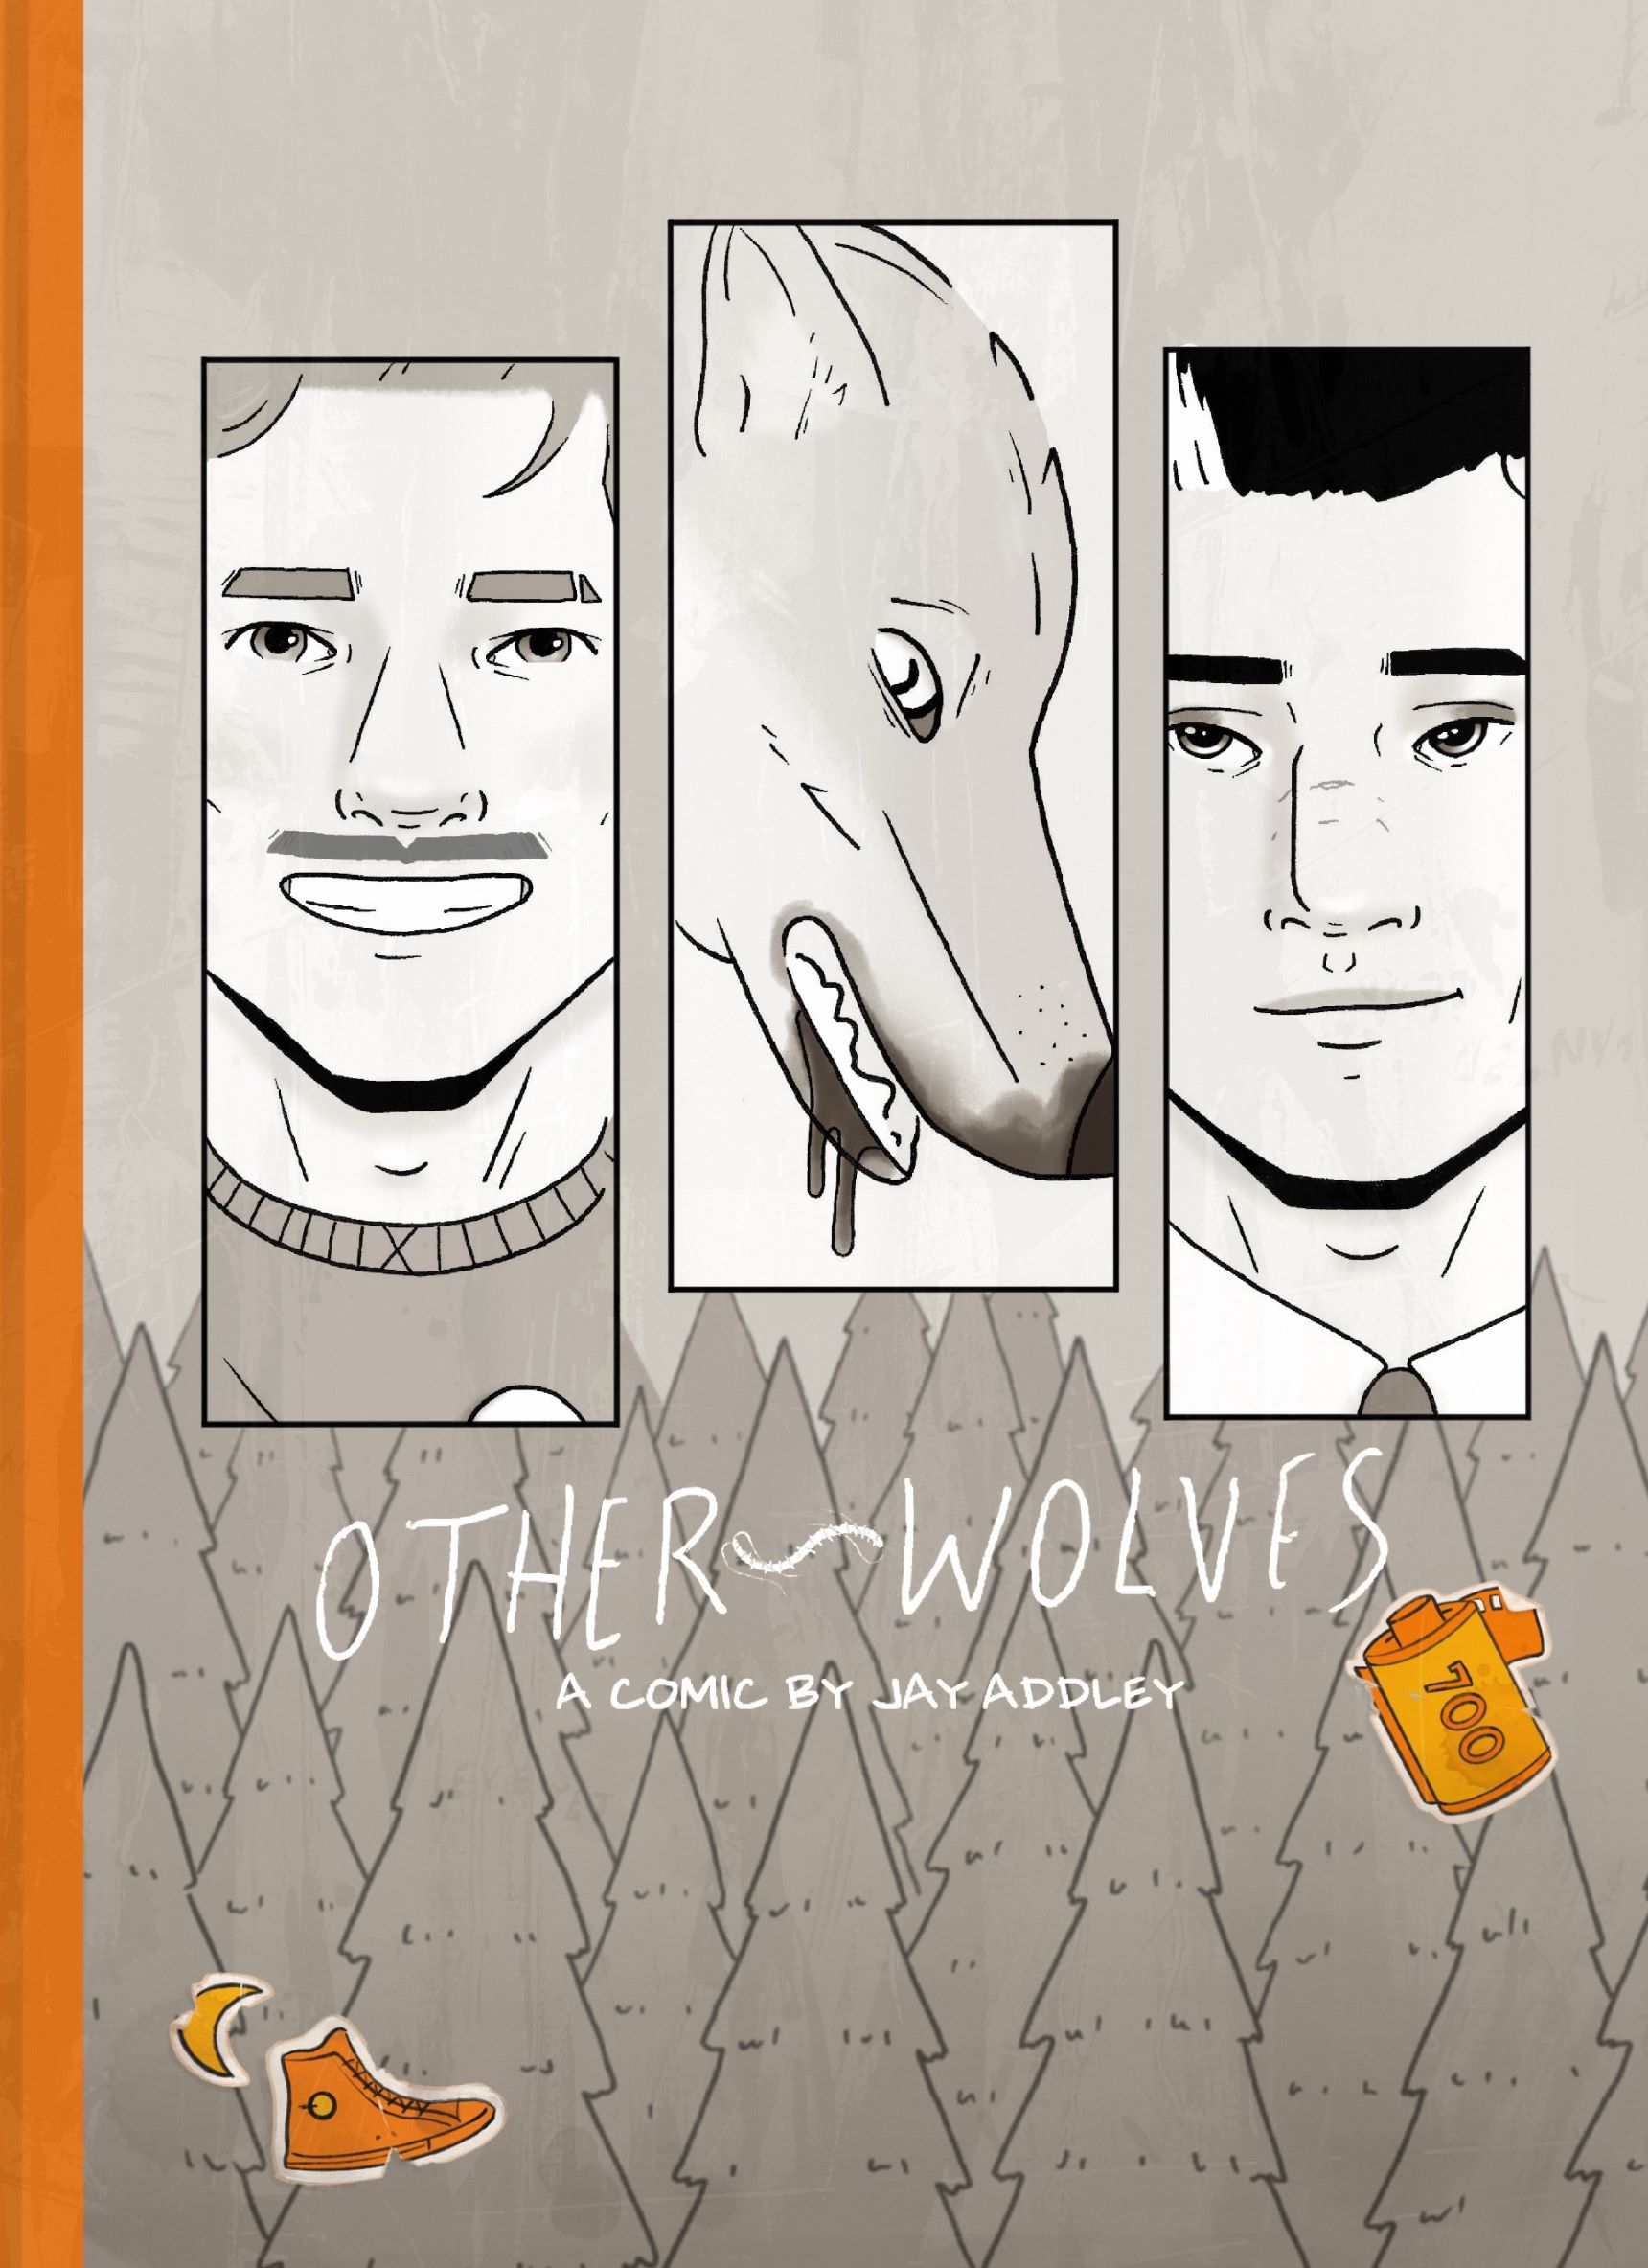 A queer horror comic book cover with a Werewolf genre trope exploring aspects of LGBTQ+ lives.